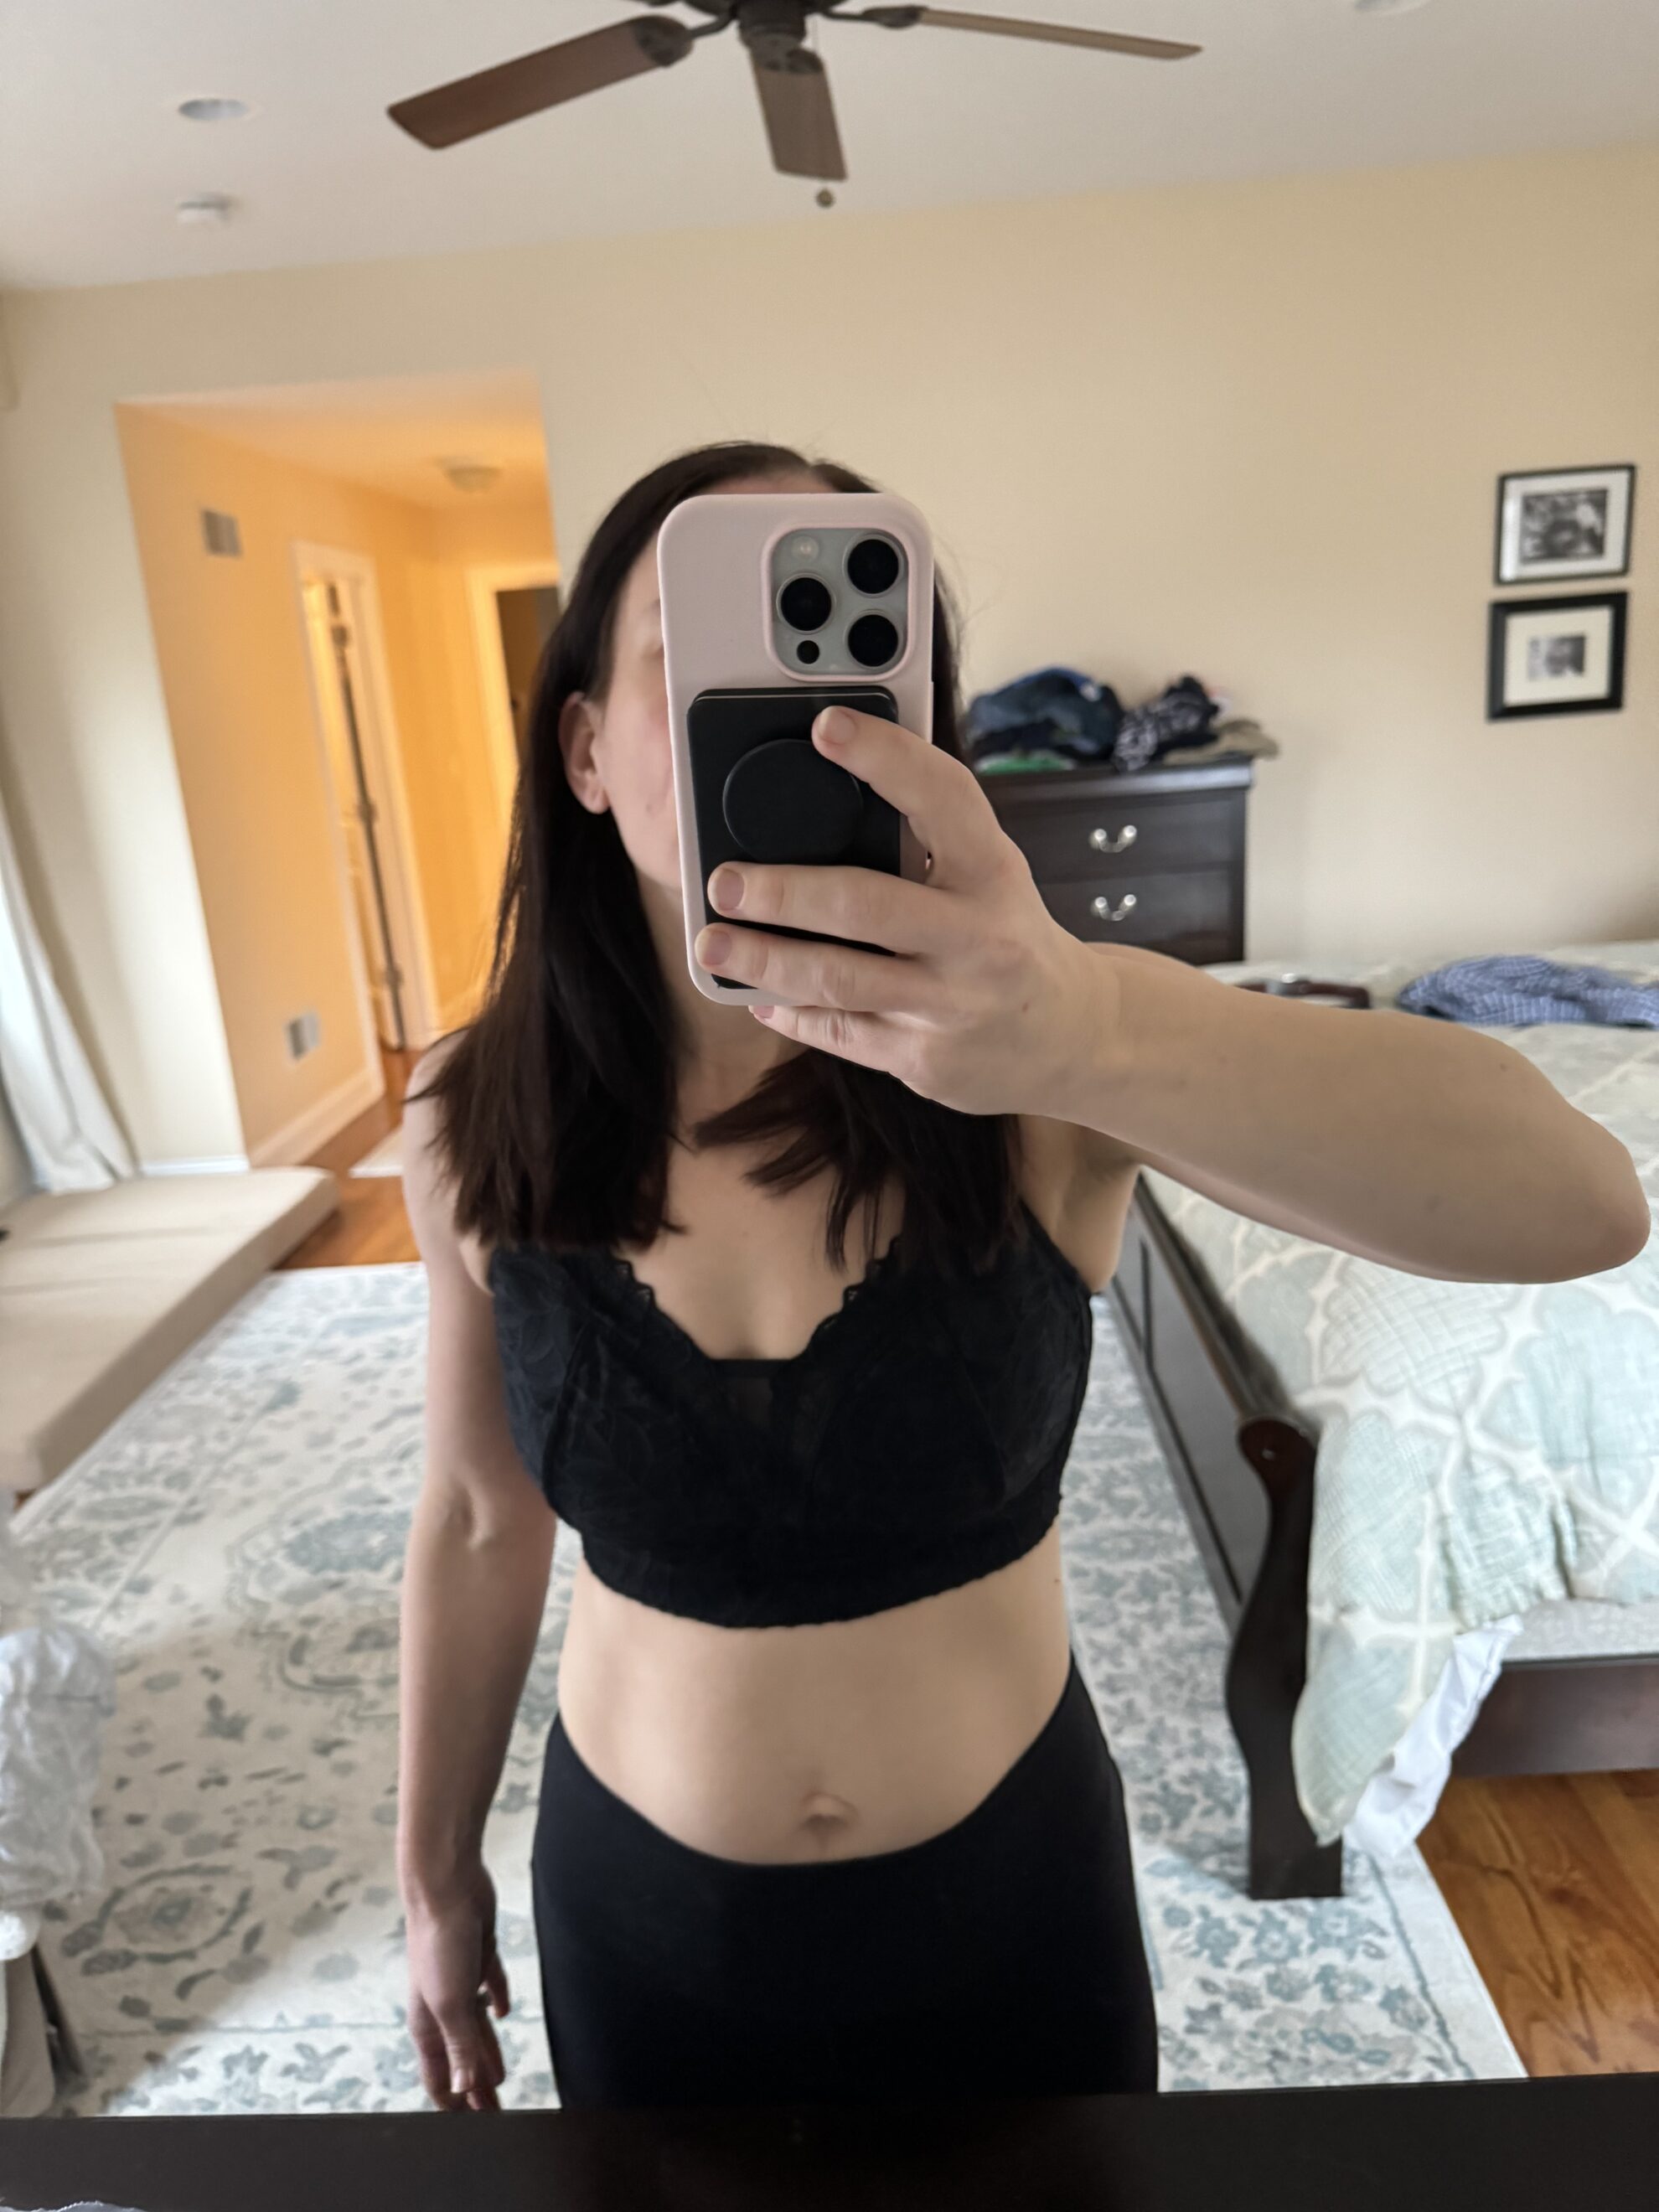 The Best Pumping Bra To Wear All Day (My Top 2 Picks)